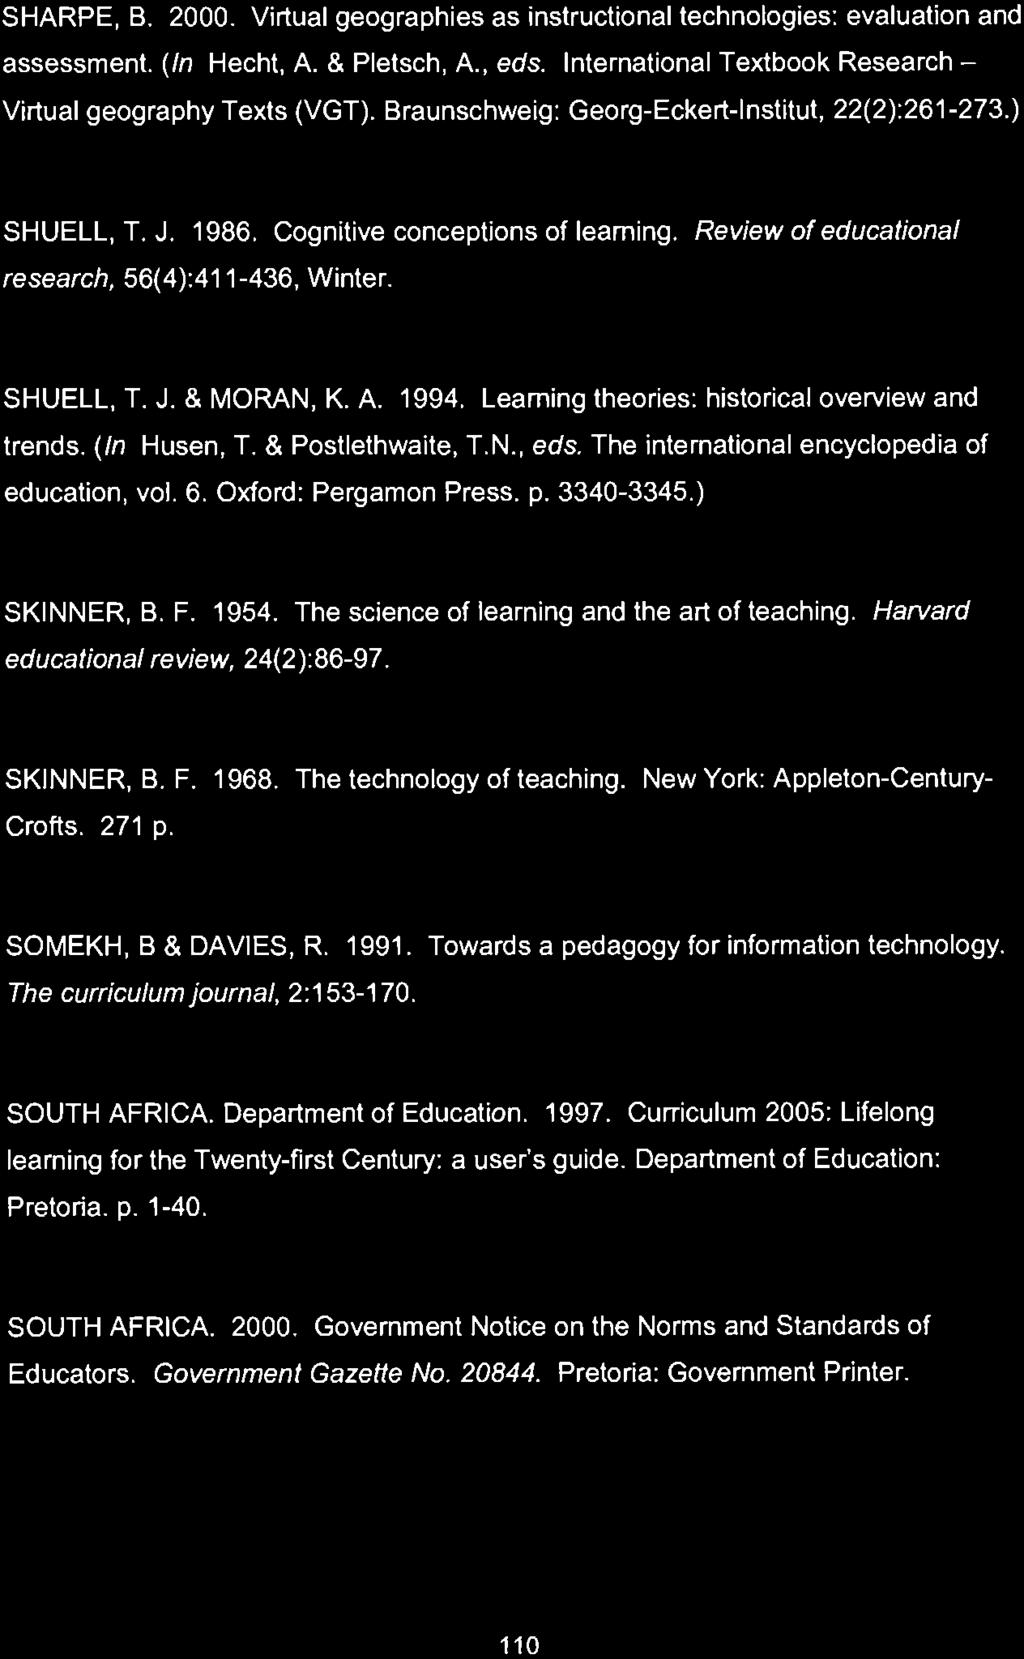 SHARPE, B. 2000. Virtual geographies as instructional technotogies: evaluation and assessment. (In Hecht, A. & Pletsch, A., eds. International Textbook Research - Virtual geography Texts (VGT).